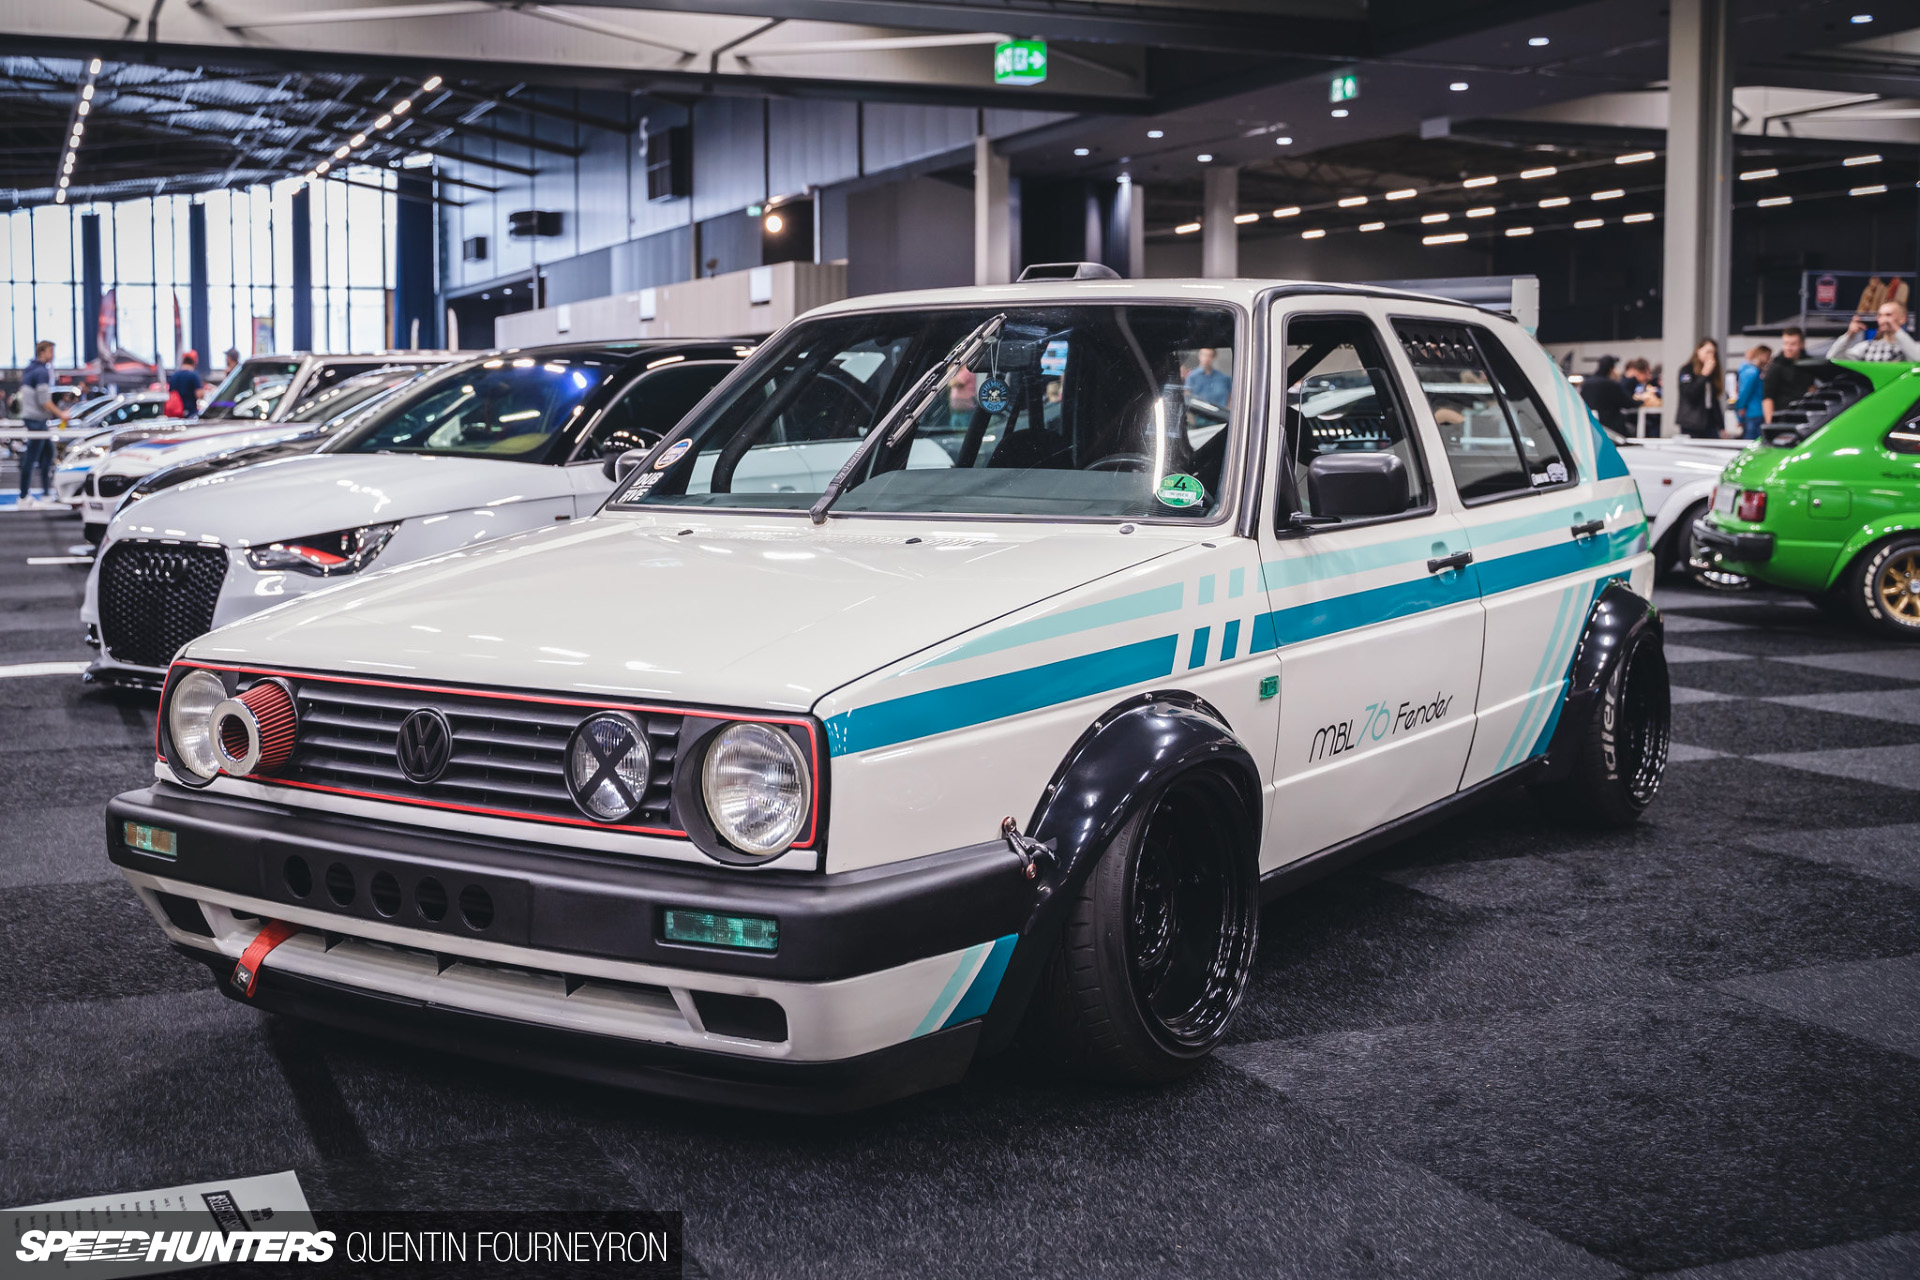 100% Auto Live: Celebrating Car Culture In The Netherlands - Speedhunters